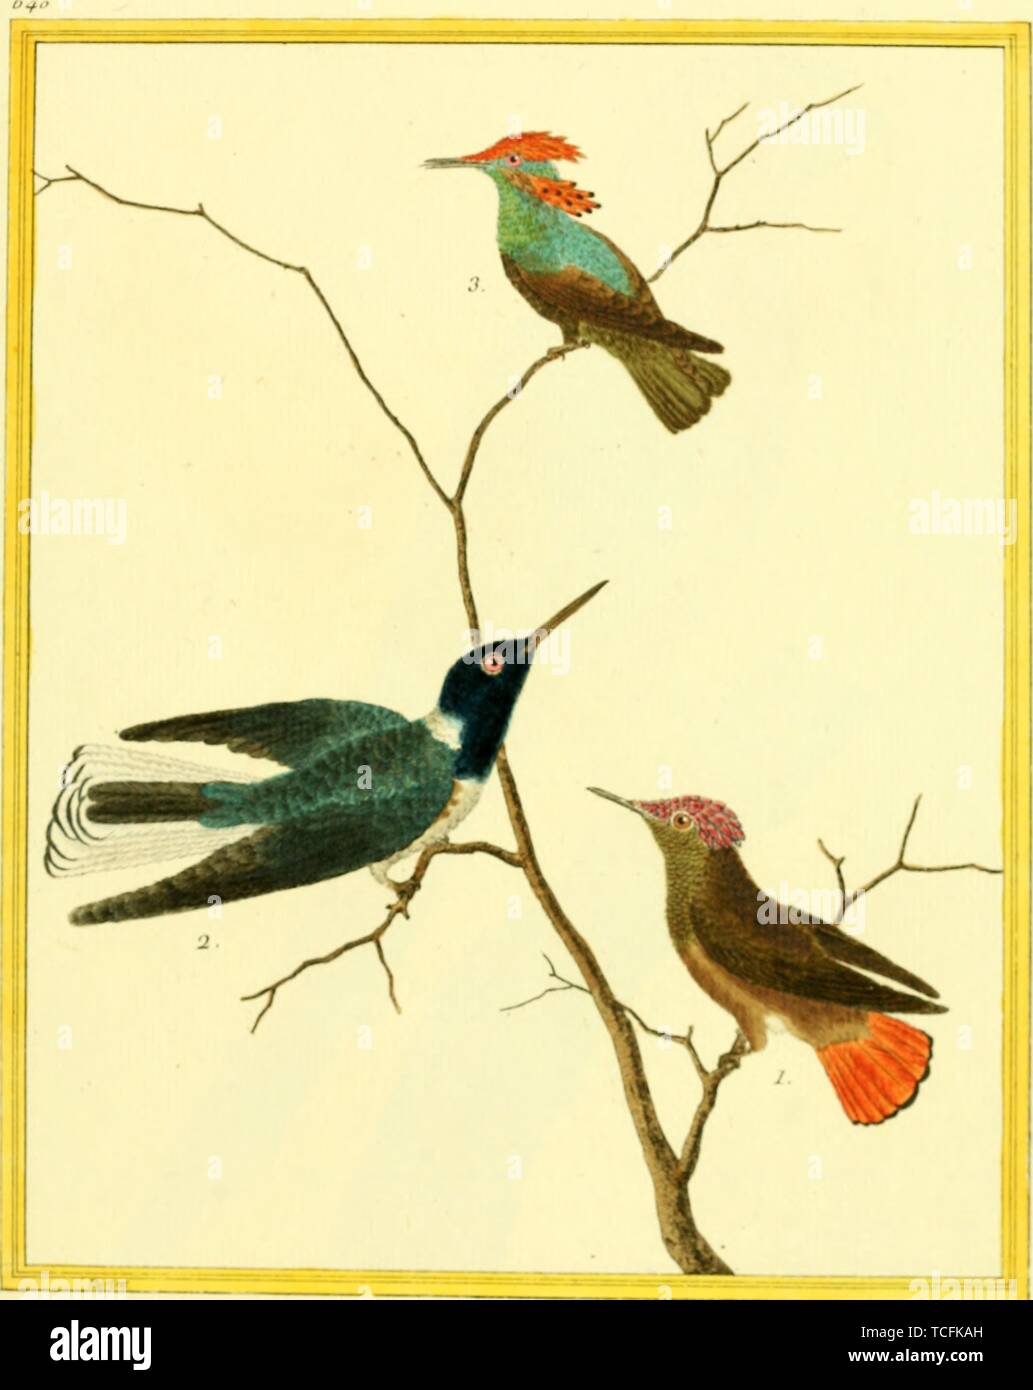 Engraved drawing of the Hummingbirds, Ruby-topaz Hummingbird (Chrysolampis mosquitus), White-necked Jacobin (Florisuga mellivora), and Tufted Coquette (Lophornis ornatus), from the book 'Planches enluminees Dhistoire naturelle' by Francois Nicolas, Louis Jean Marie Daubenton, and Edme-Louis Daubenton, 1765. Courtesy Internet Archive. () Stock Photo